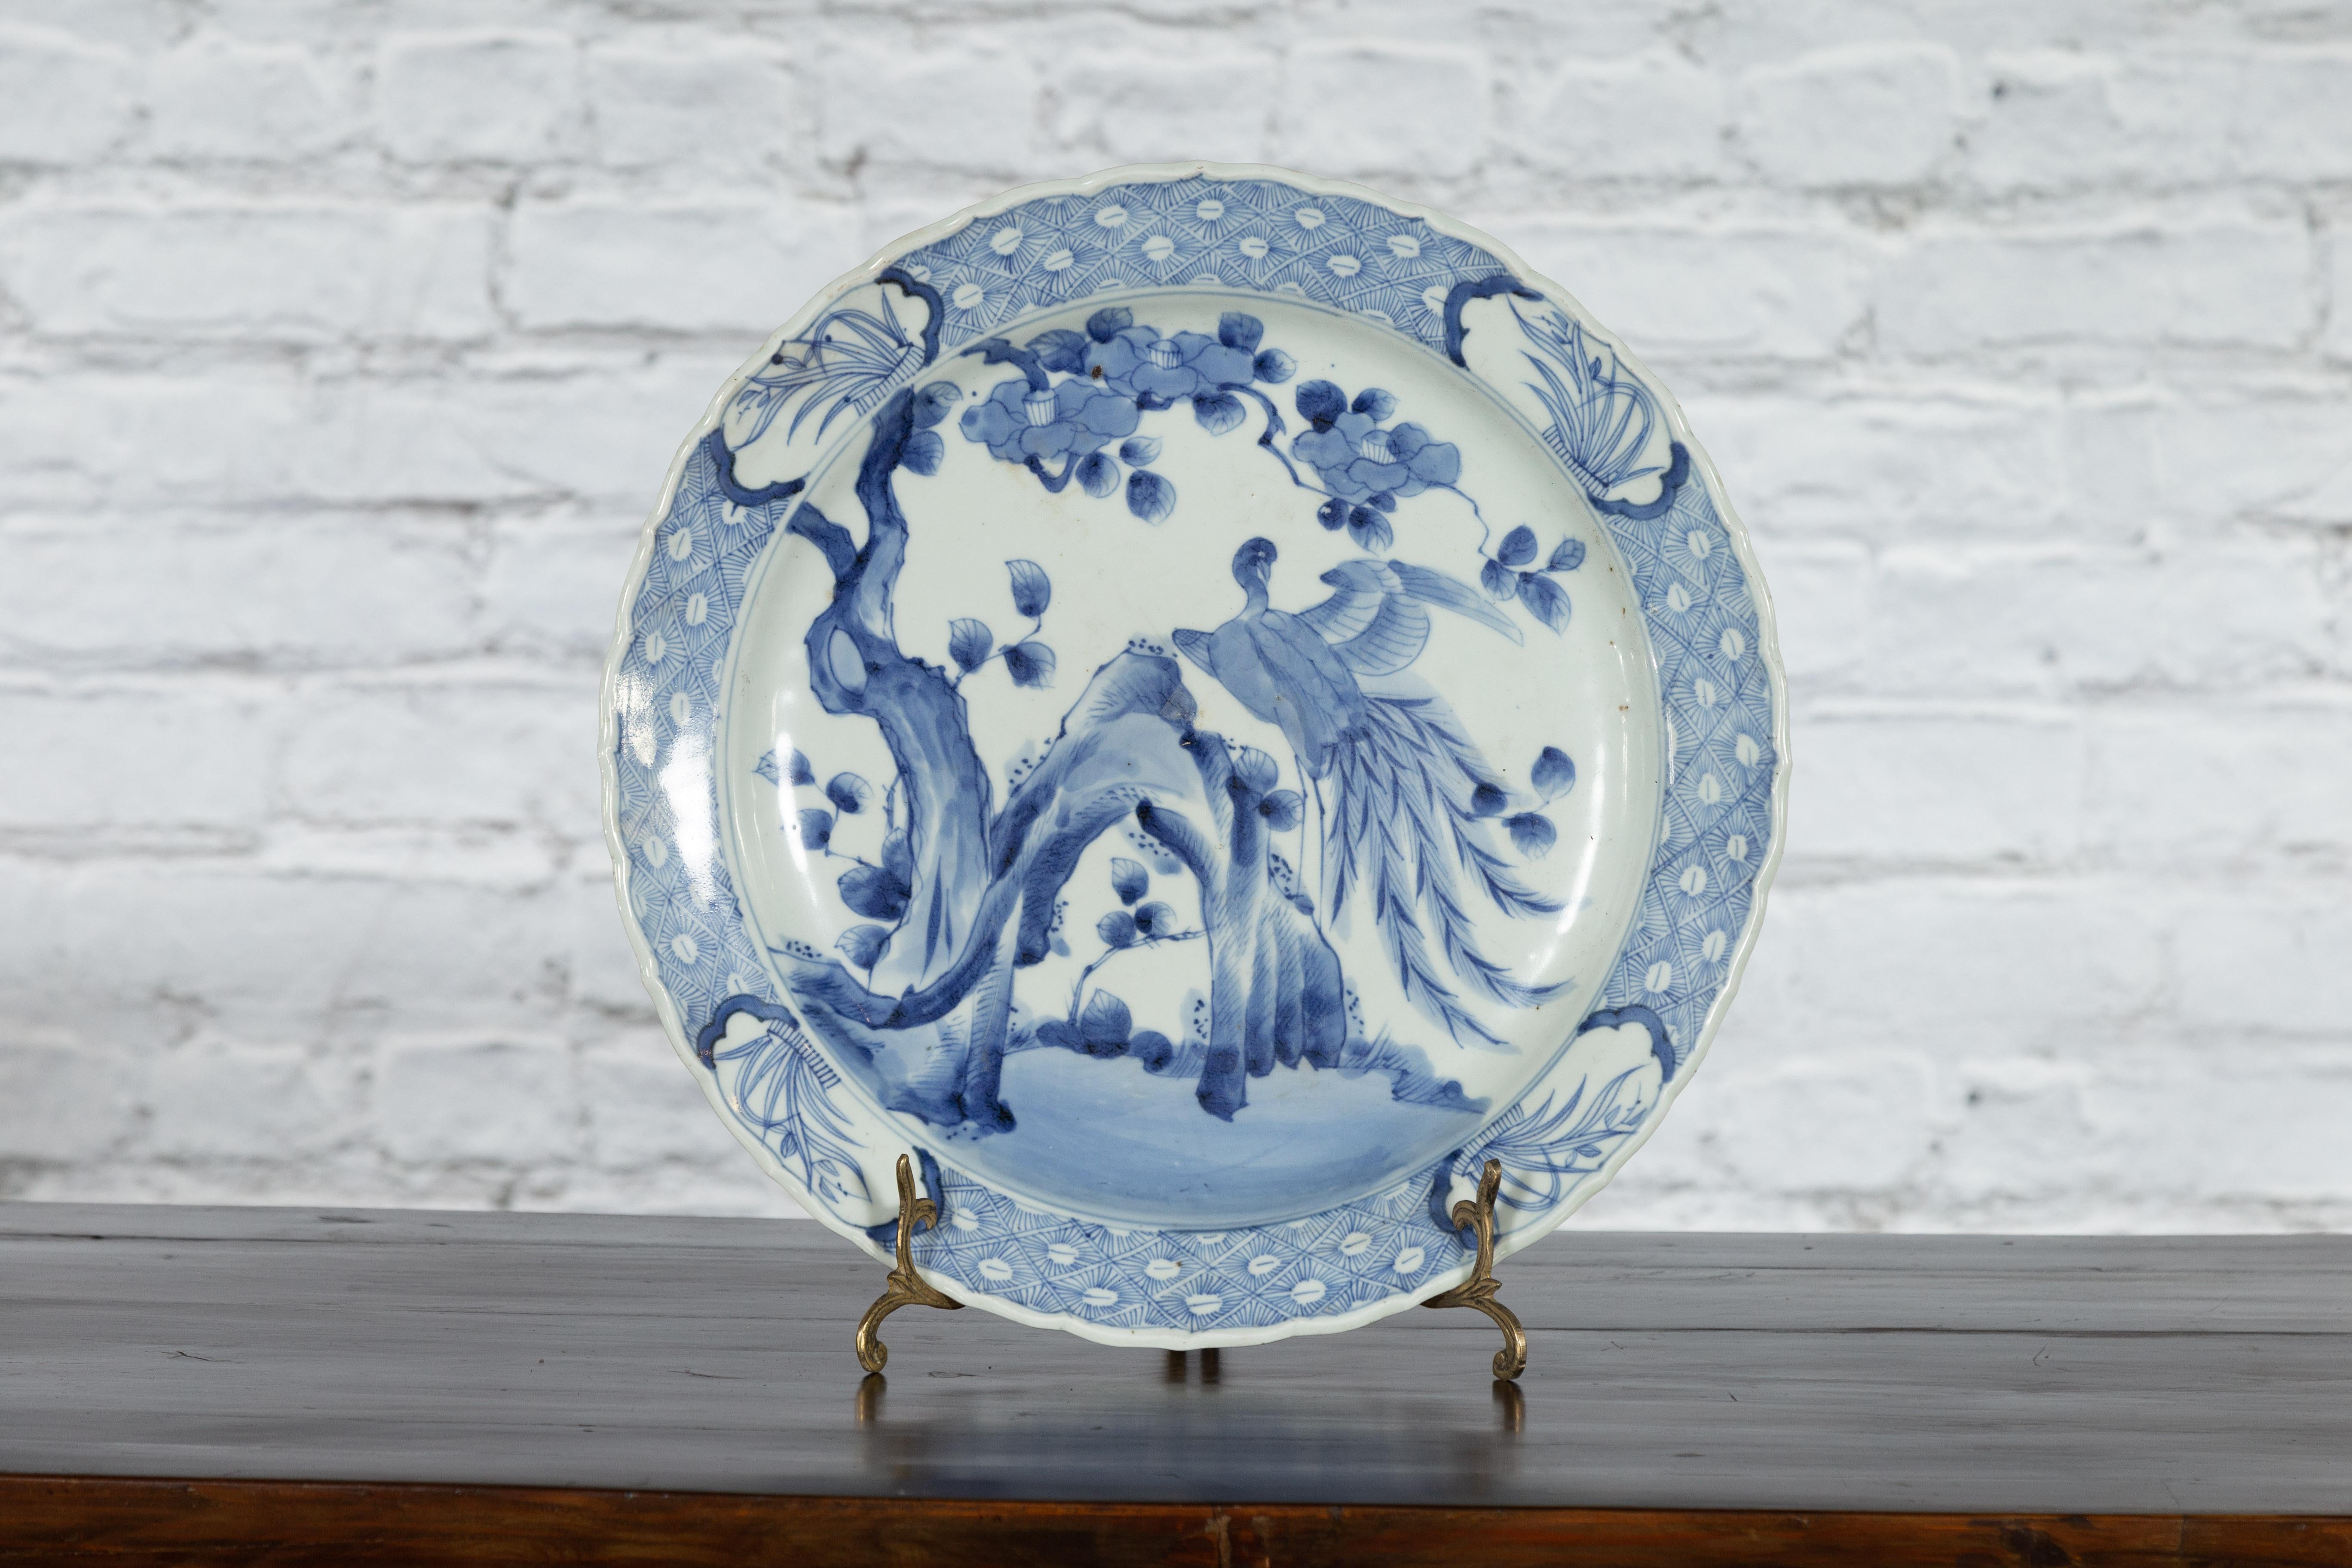 A Japanese porcelain plate from the 19th century, with hand-painted blue and white tree, rock and bird décor. Created in Japan during the 19th century, this porcelain plate features a delicate blue and white décor depicting an artistic, balanced